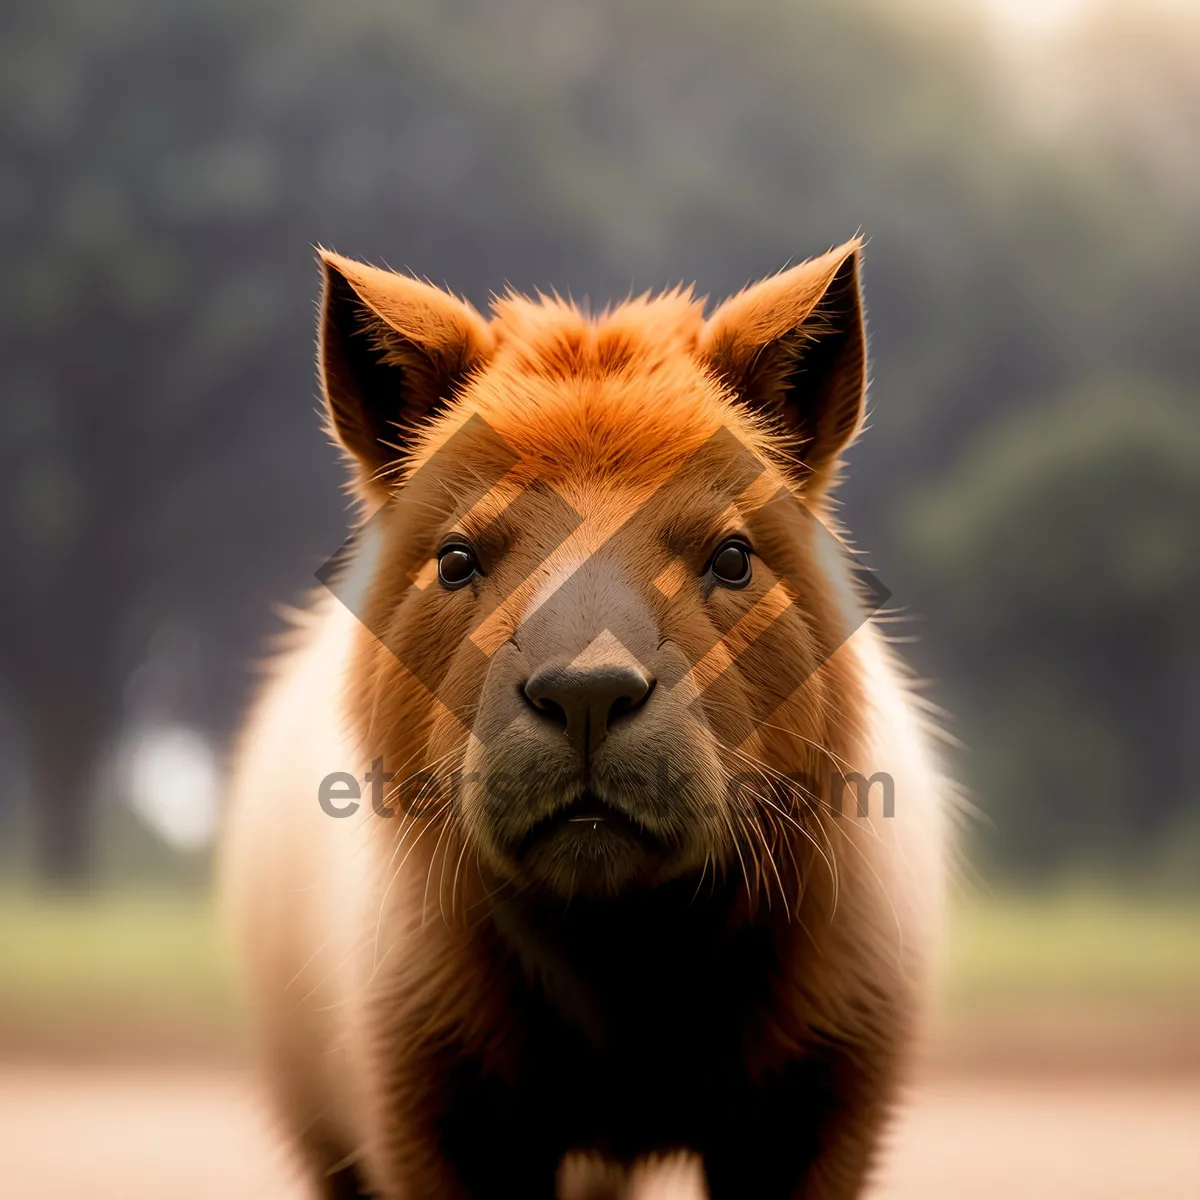 Picture of Wild Lioness with Mane in Grassland